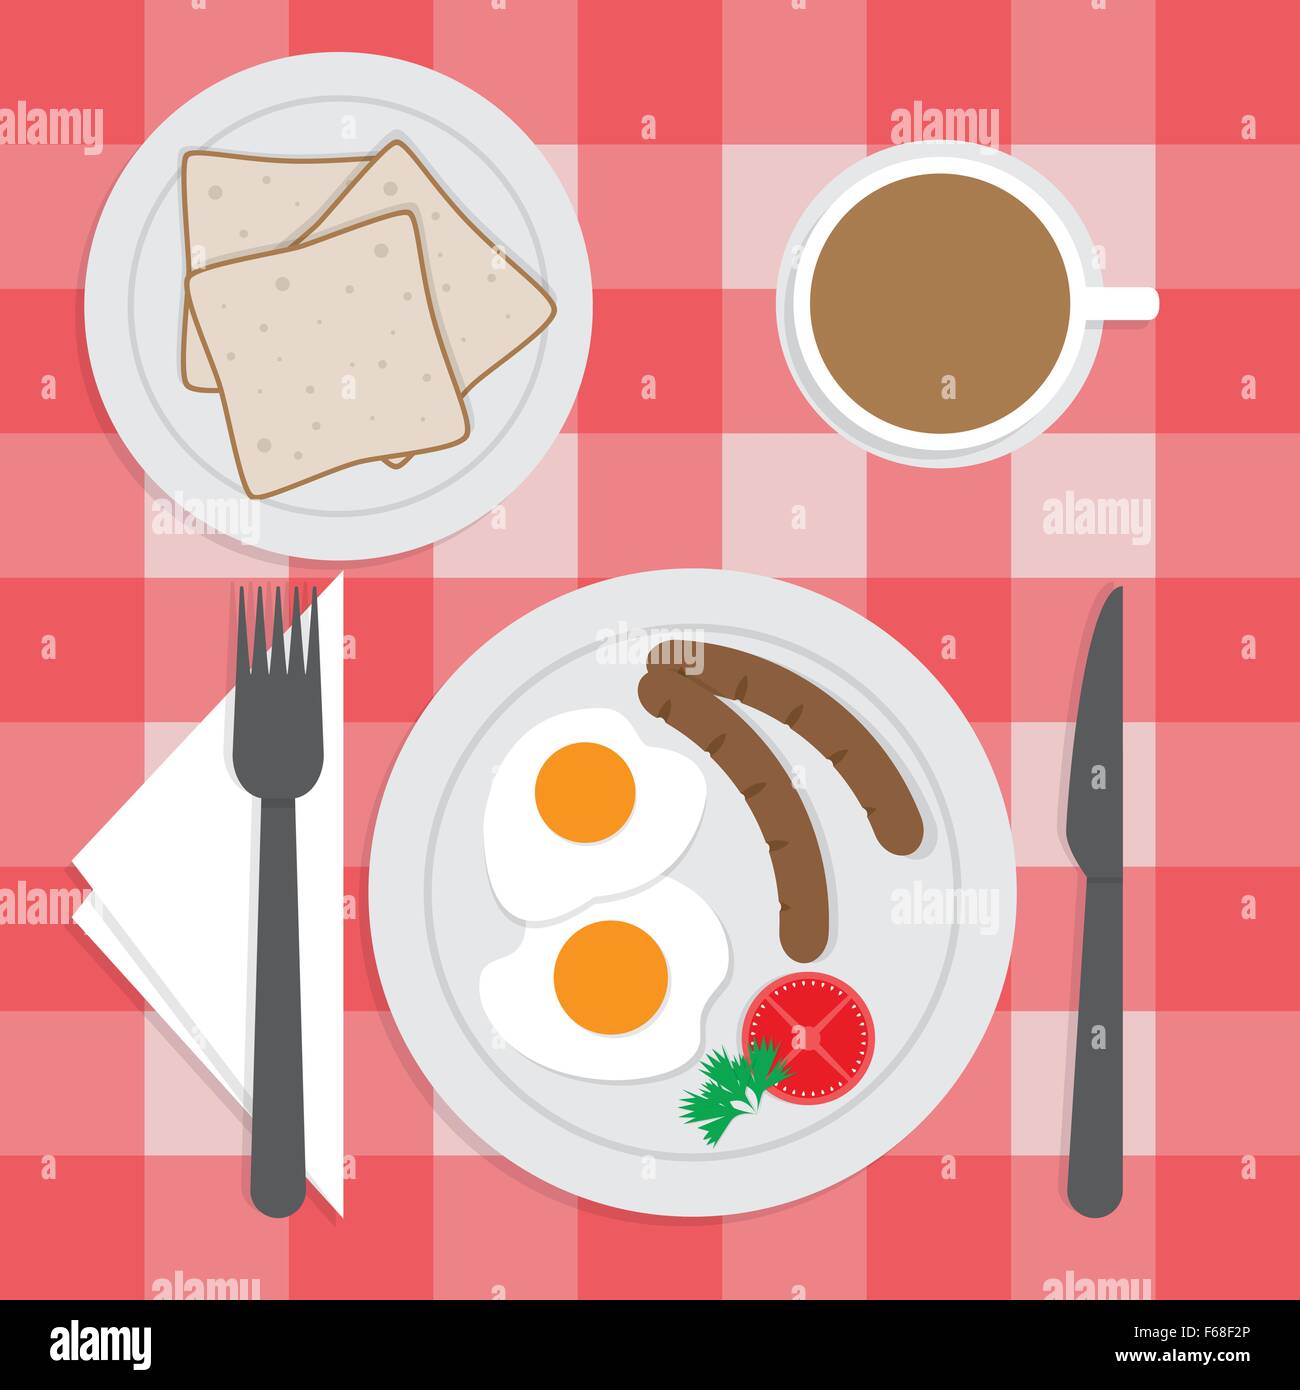 American breakfast set on the table, Fried egg, Sausages, Bread, Coffee, VECTOR, EPS10 Stock Vector